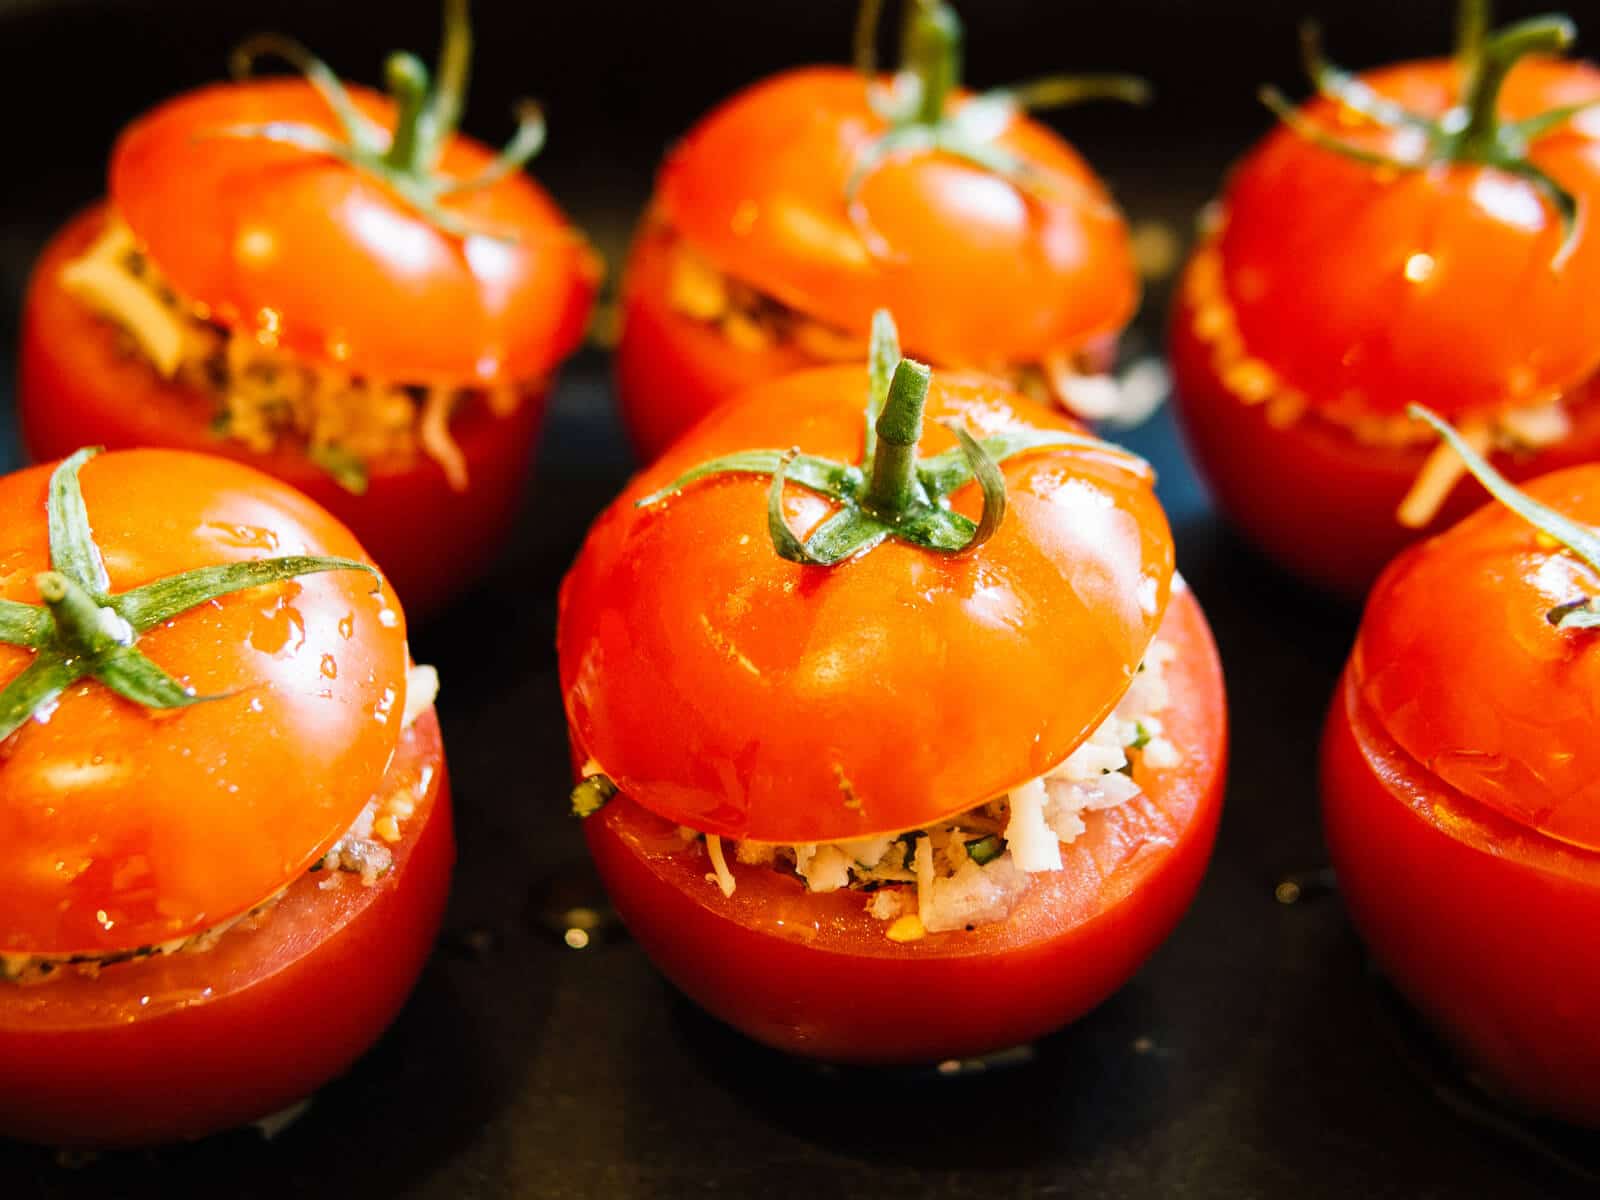 Plank-grilled stuffed tomatoes